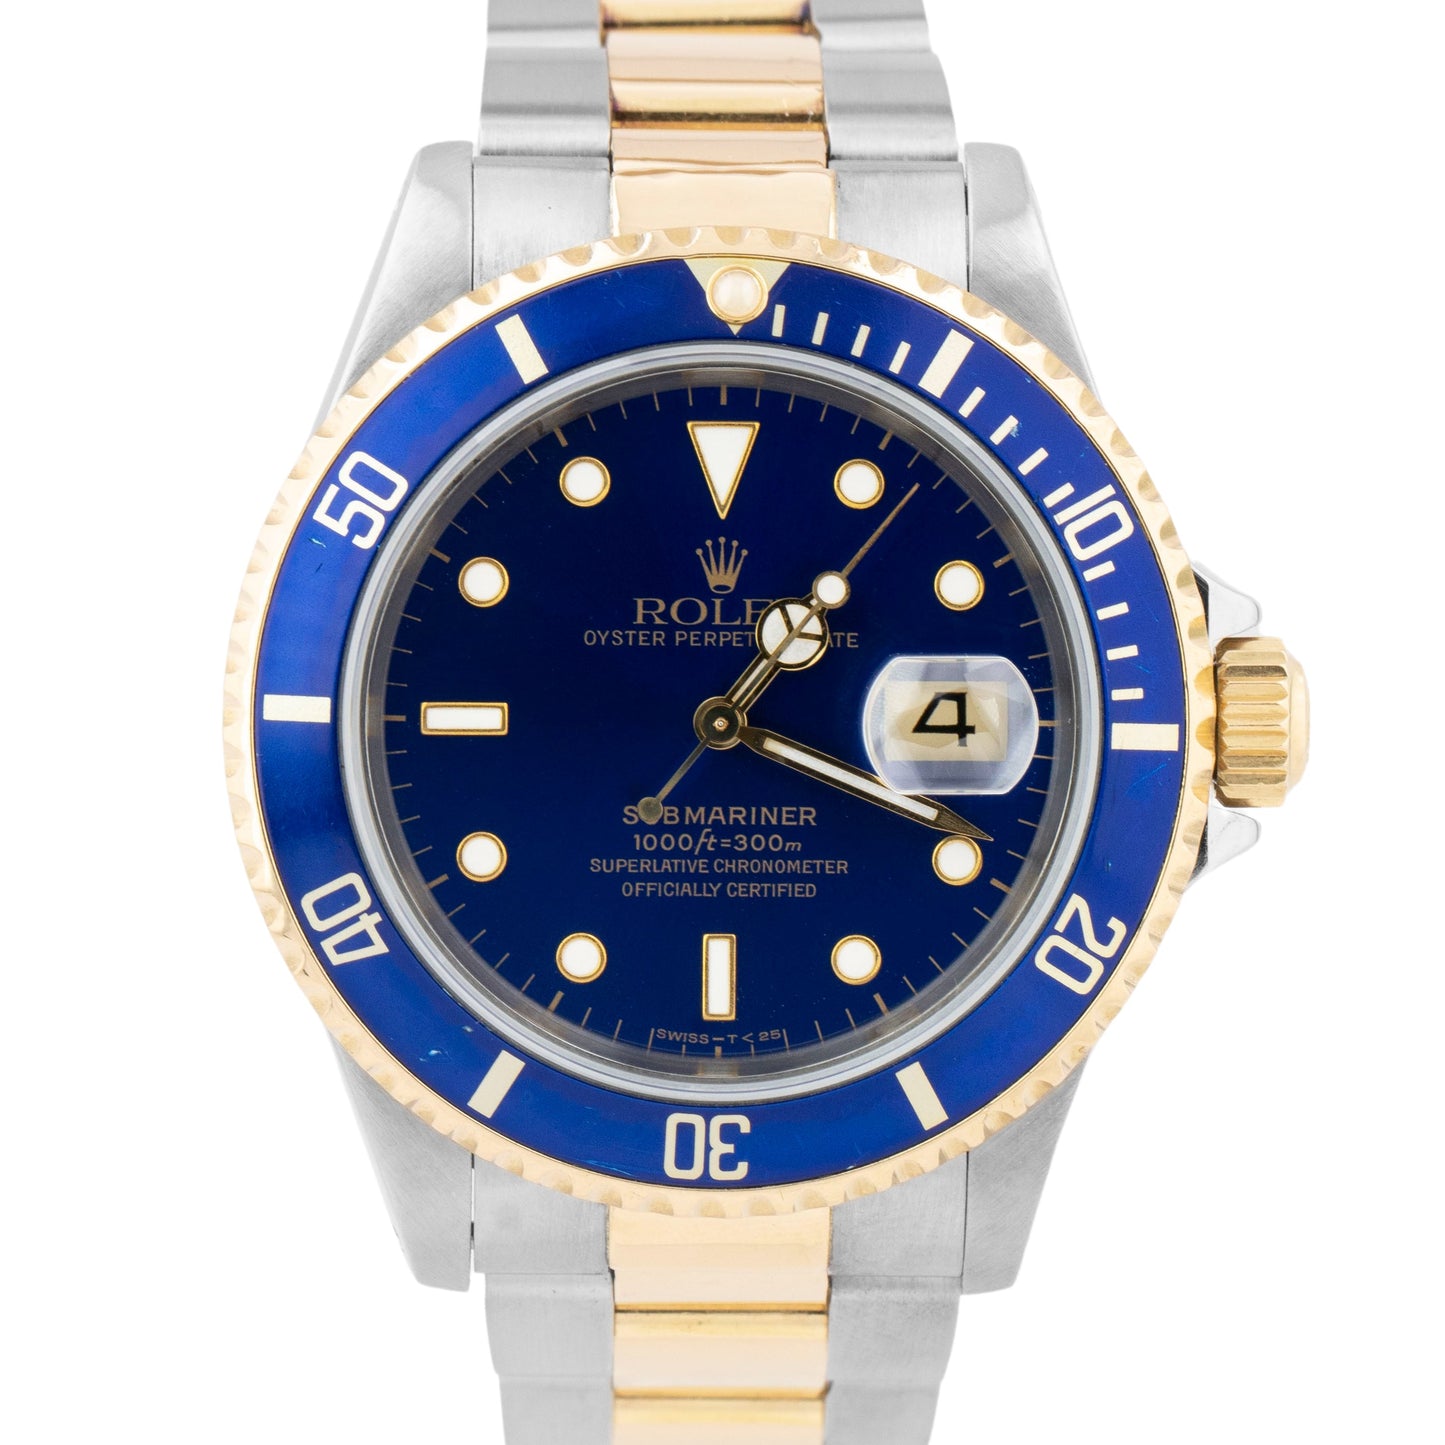 1995 PAPERS Rolex Submariner Date 40mm BLUE DIAL Two-Tone 16613 LB Watch B+P